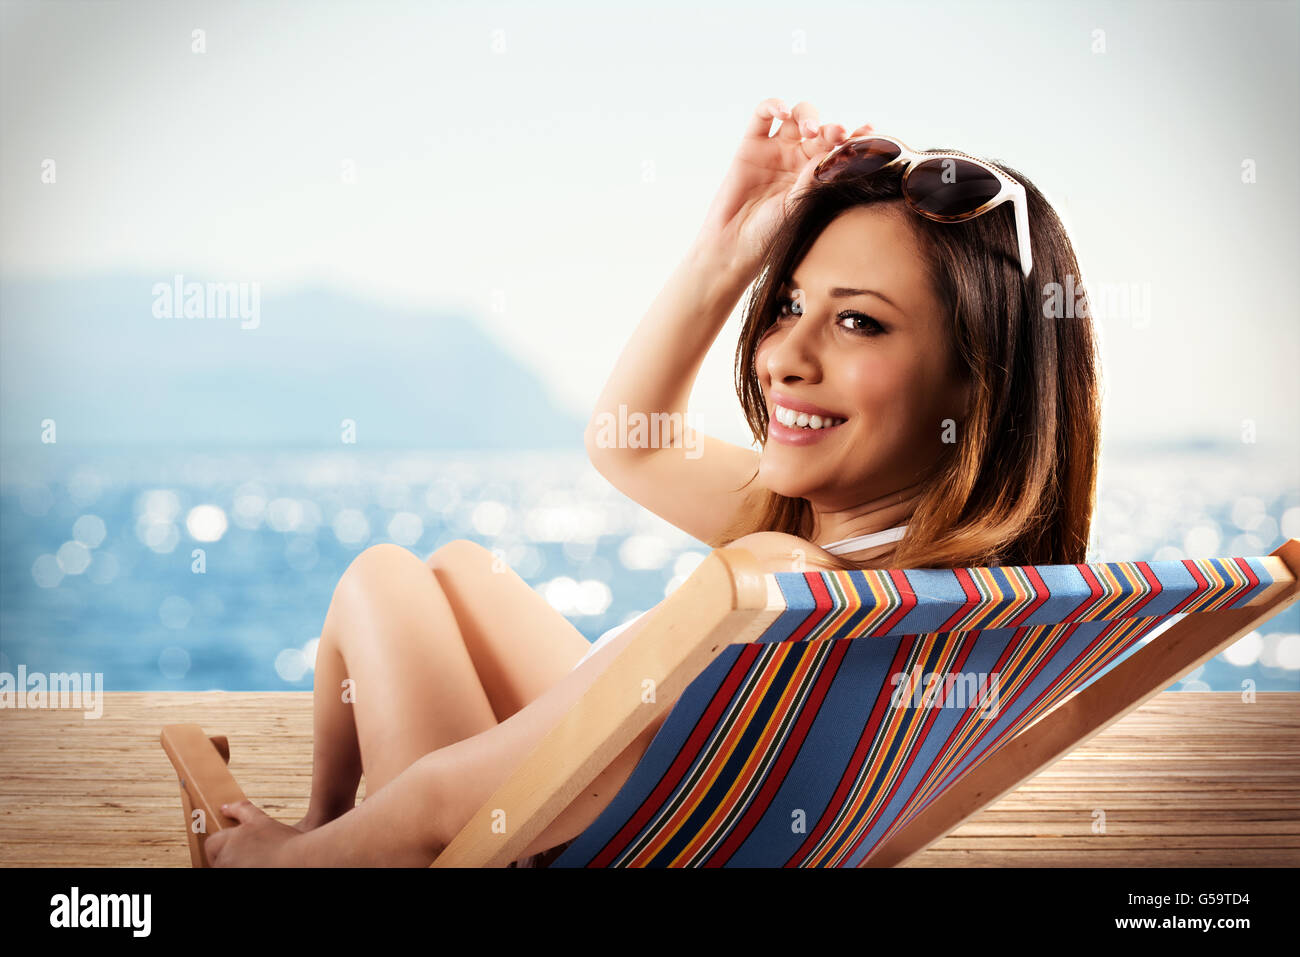 Happiness on vacation Stock Photo